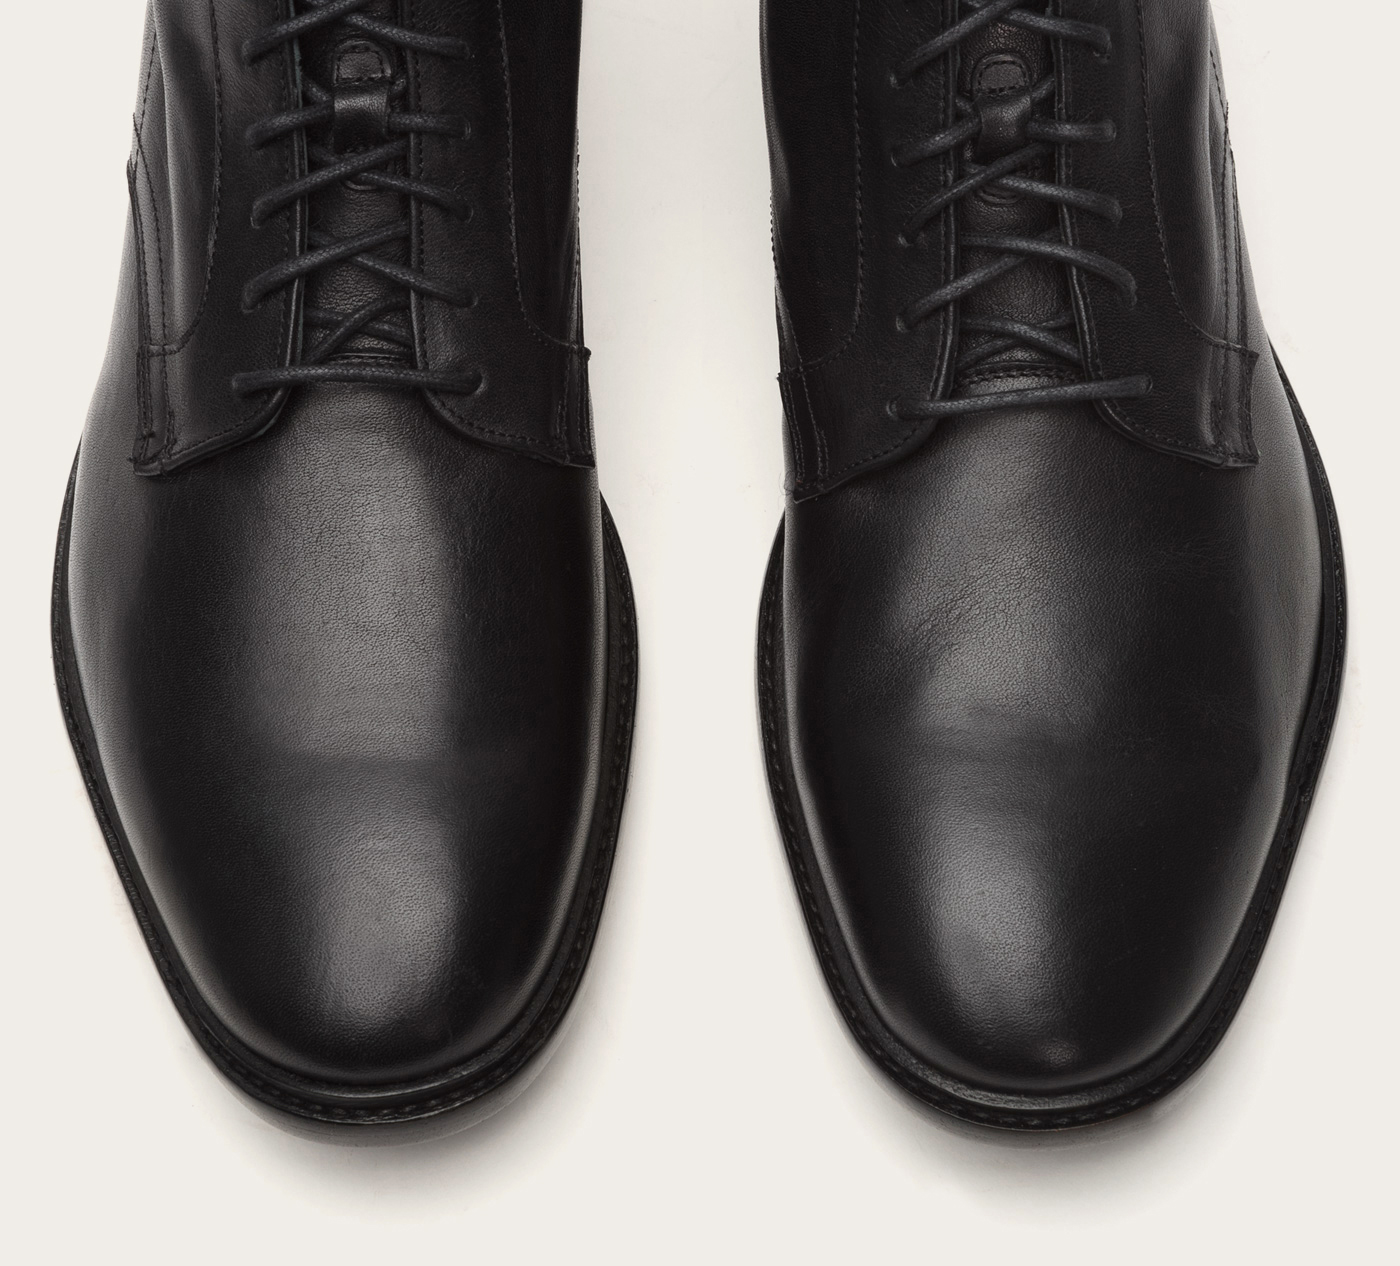 Lyst - Frye Patrick Lace Up in Black for Men